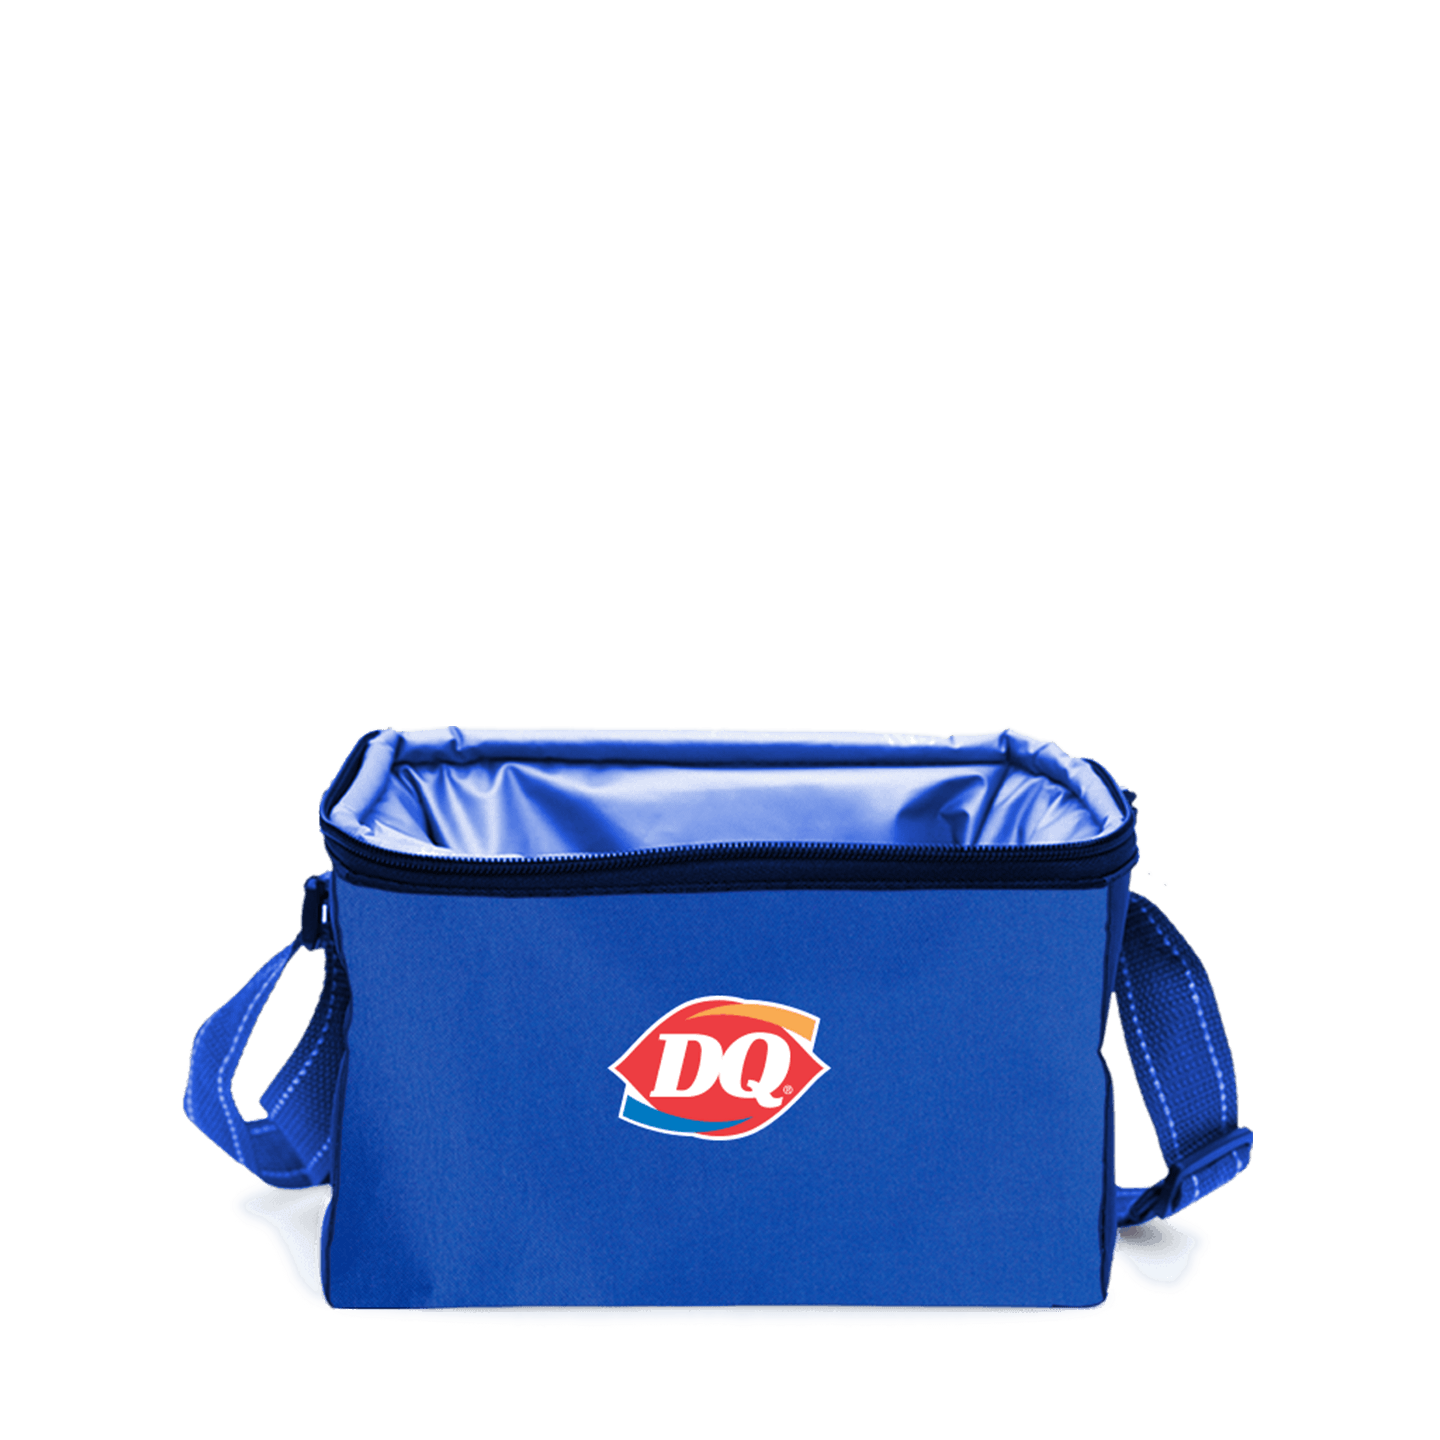 DQ Lunch Box